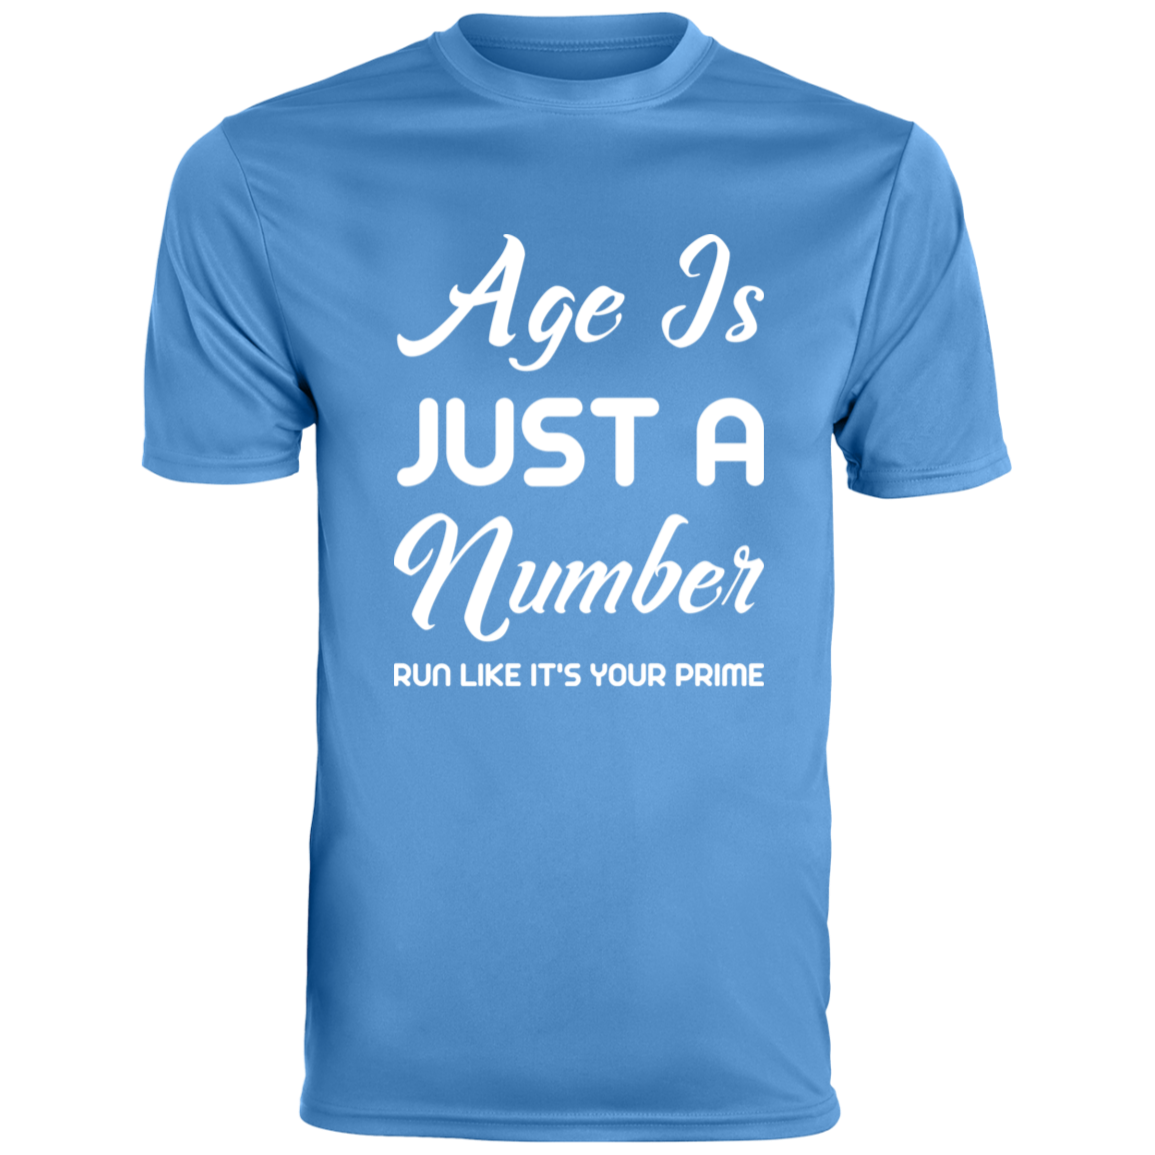 Men's Inspirational Top Age is just a number. Run like it's your prime